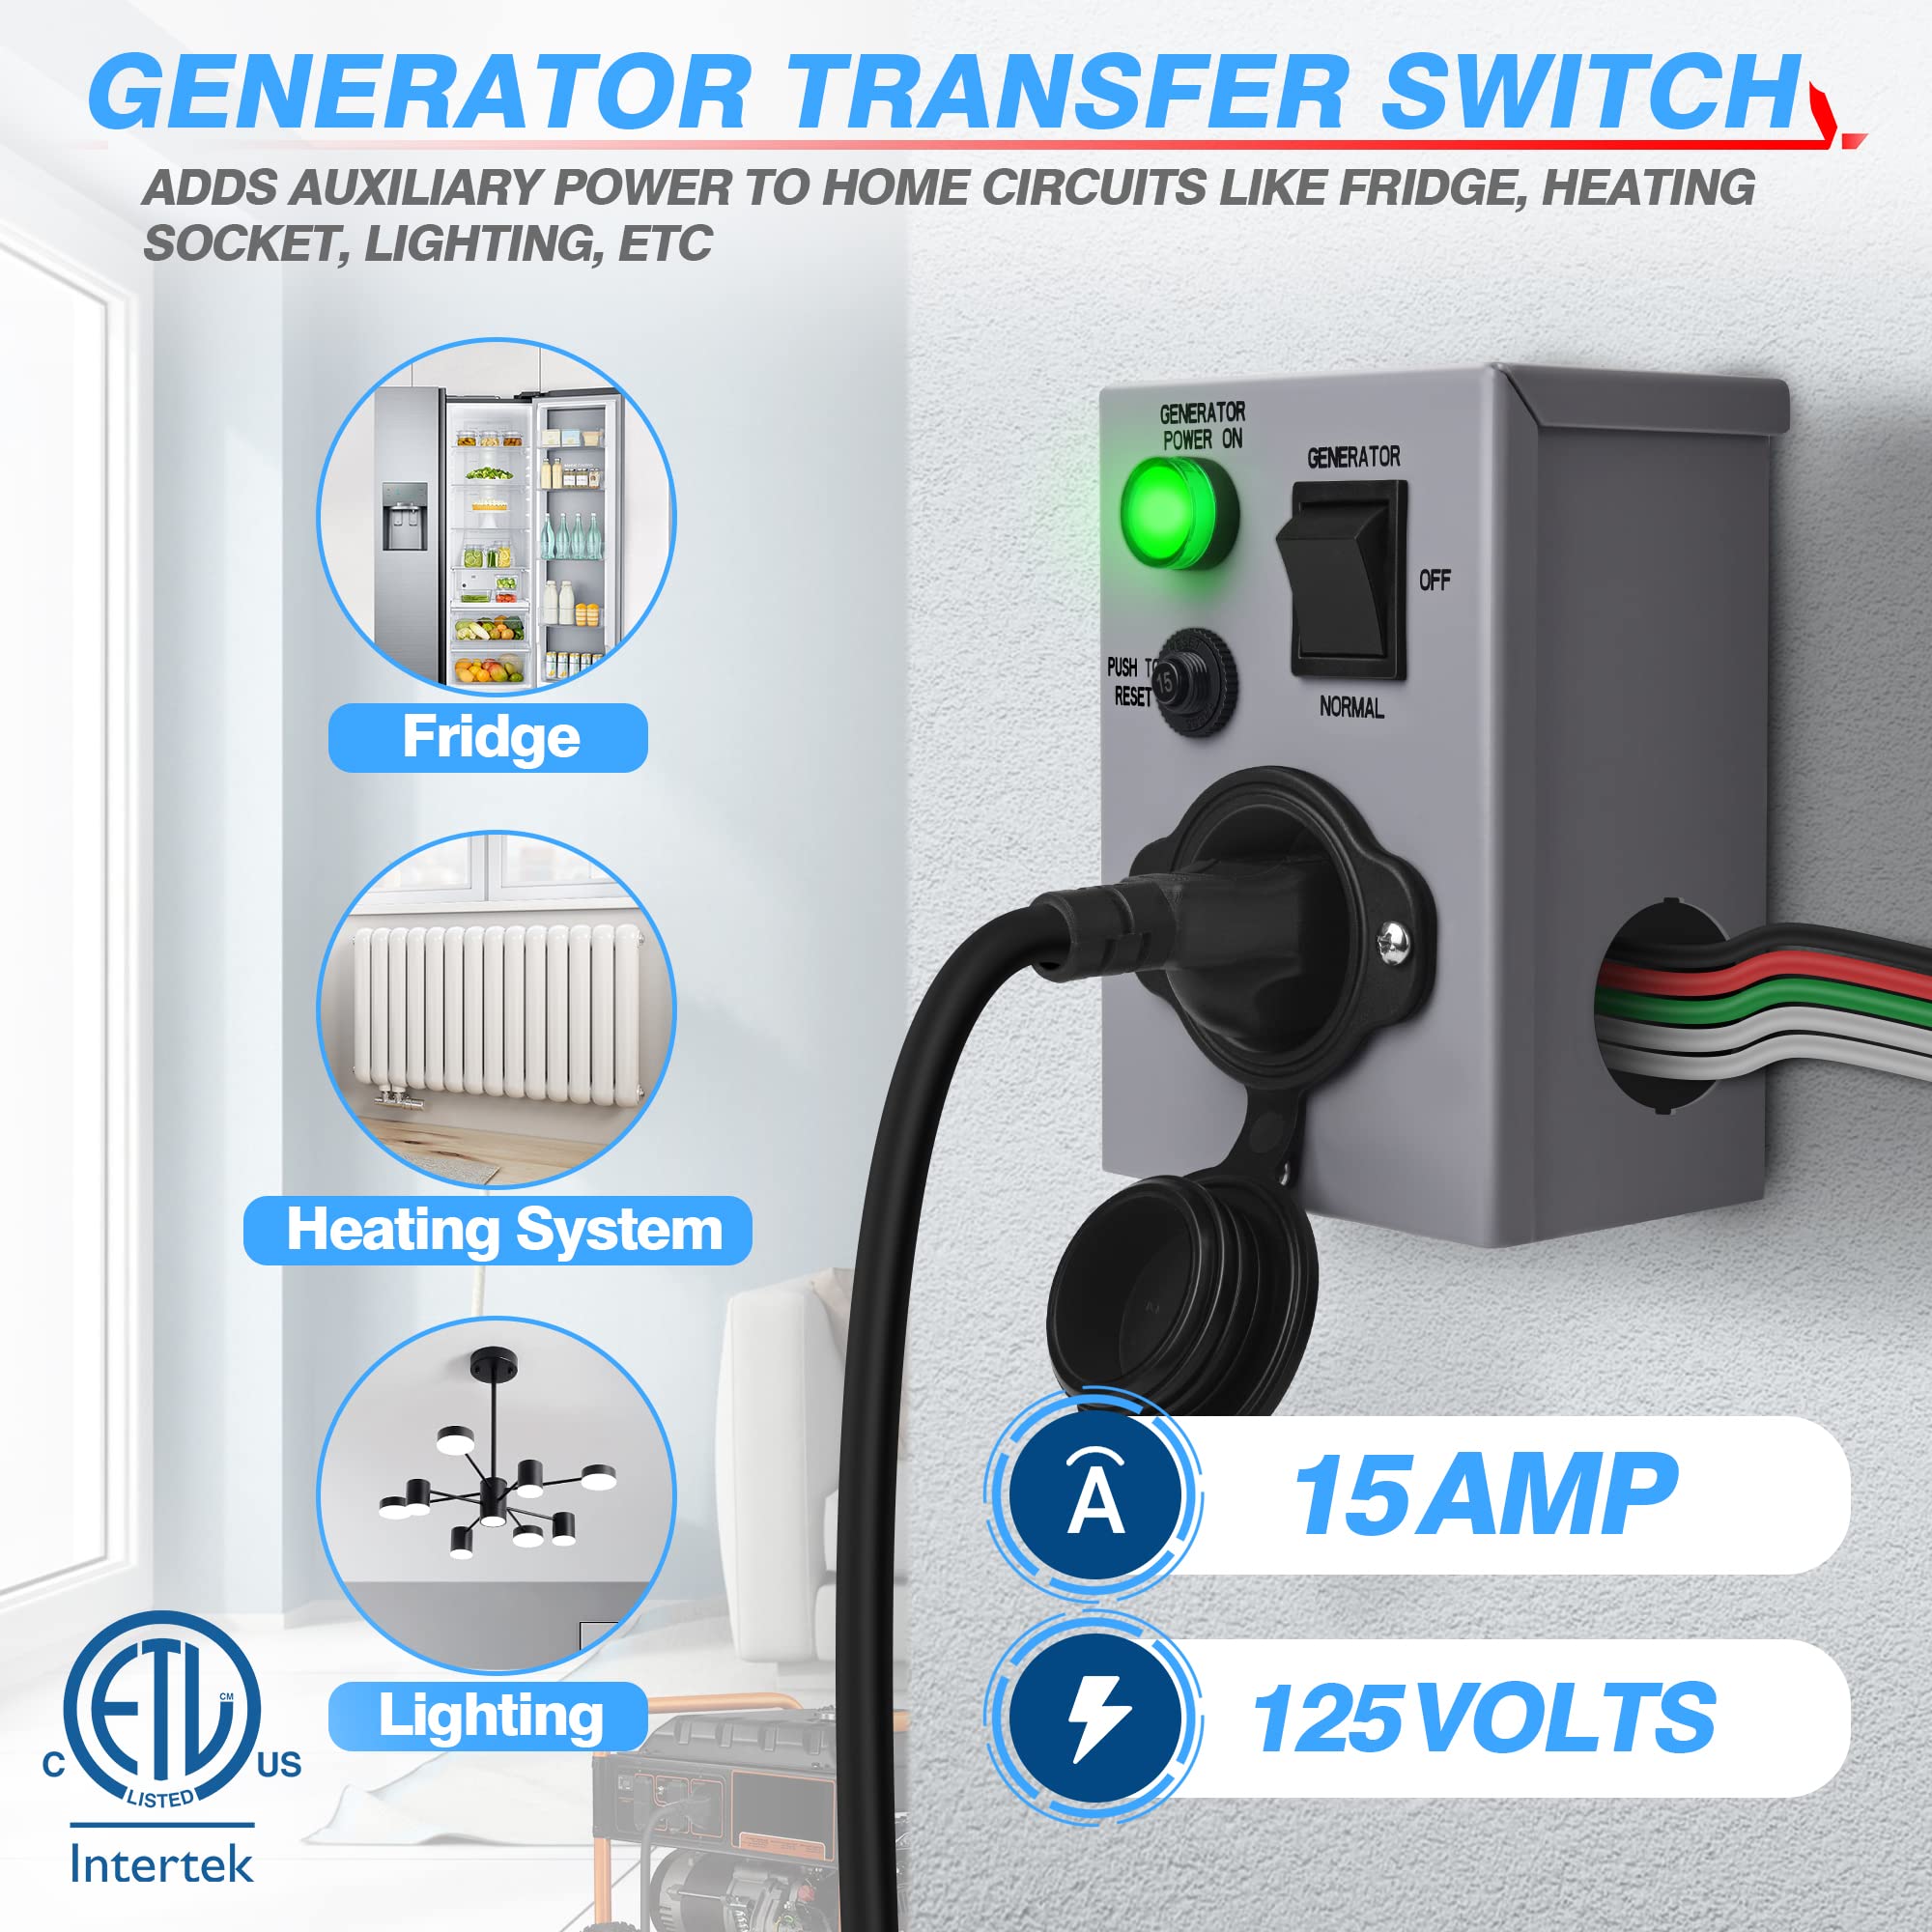 MICTUNING 15 Amp 125V Generator Transfer Switch, Power Inlet Box, Waterproof Manual Transfer Switch with Circuit Breaker for Generator Indoor and Outdoor